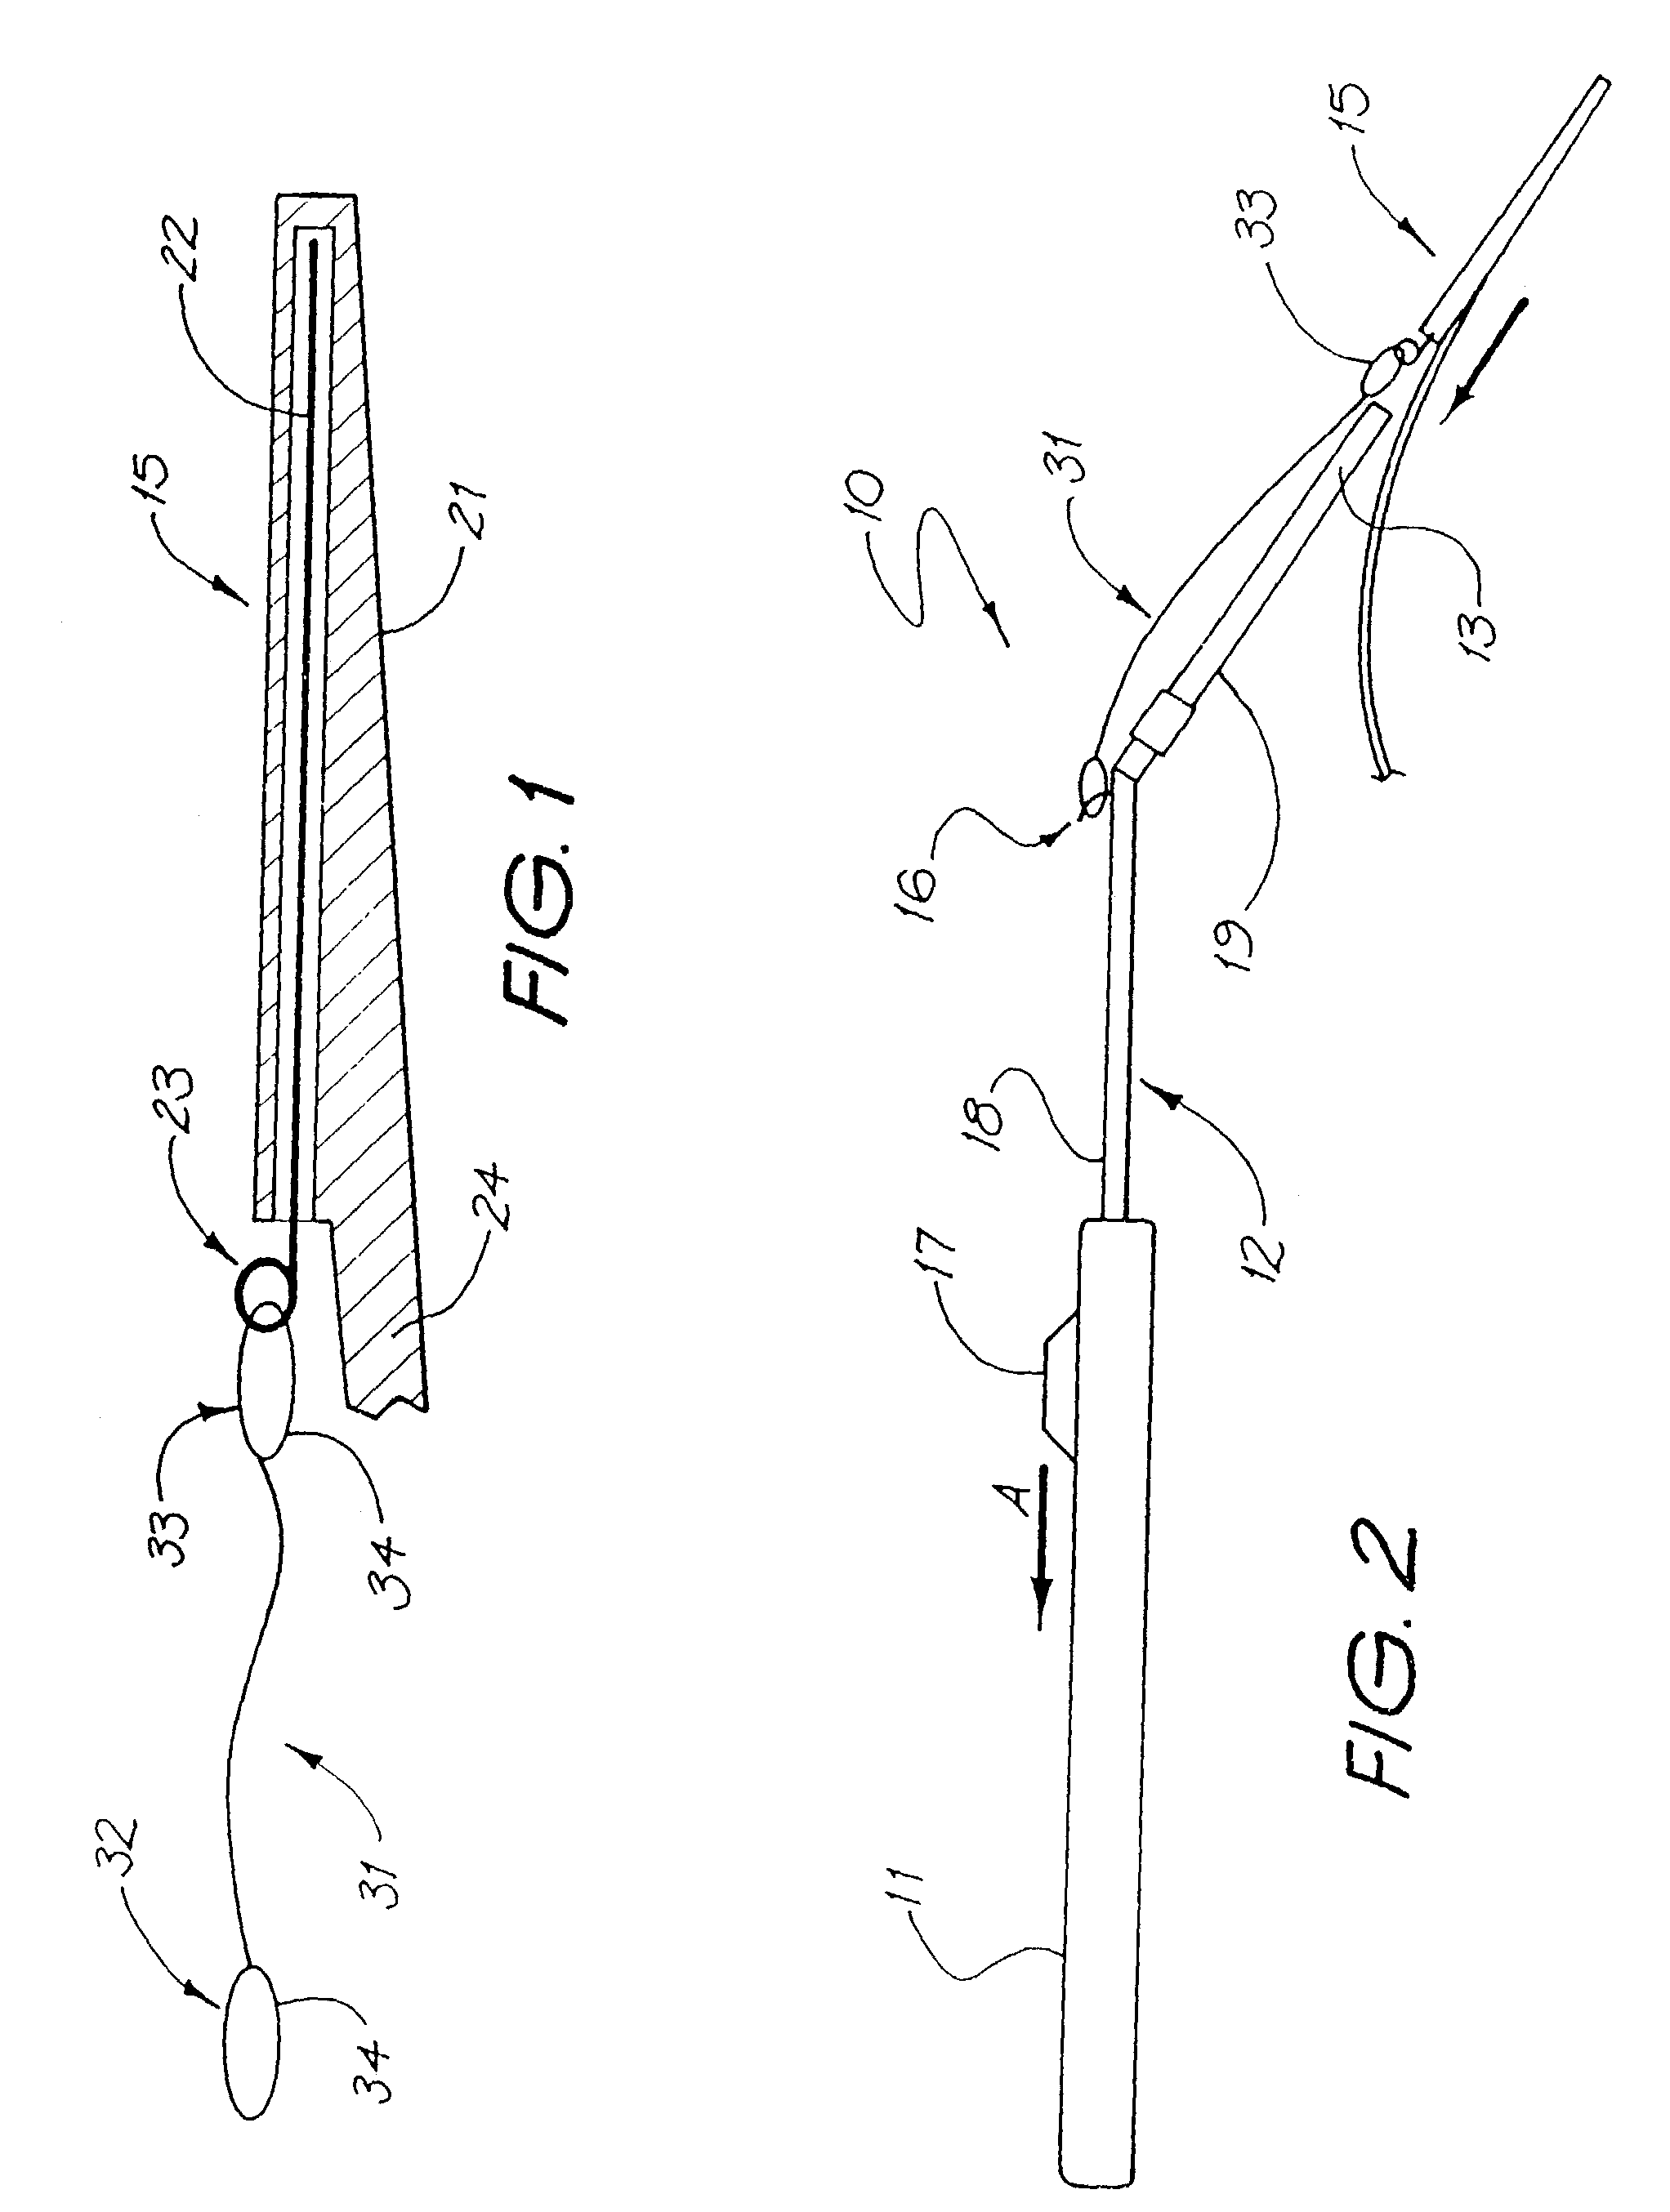 Insertion tool system for an electrode array